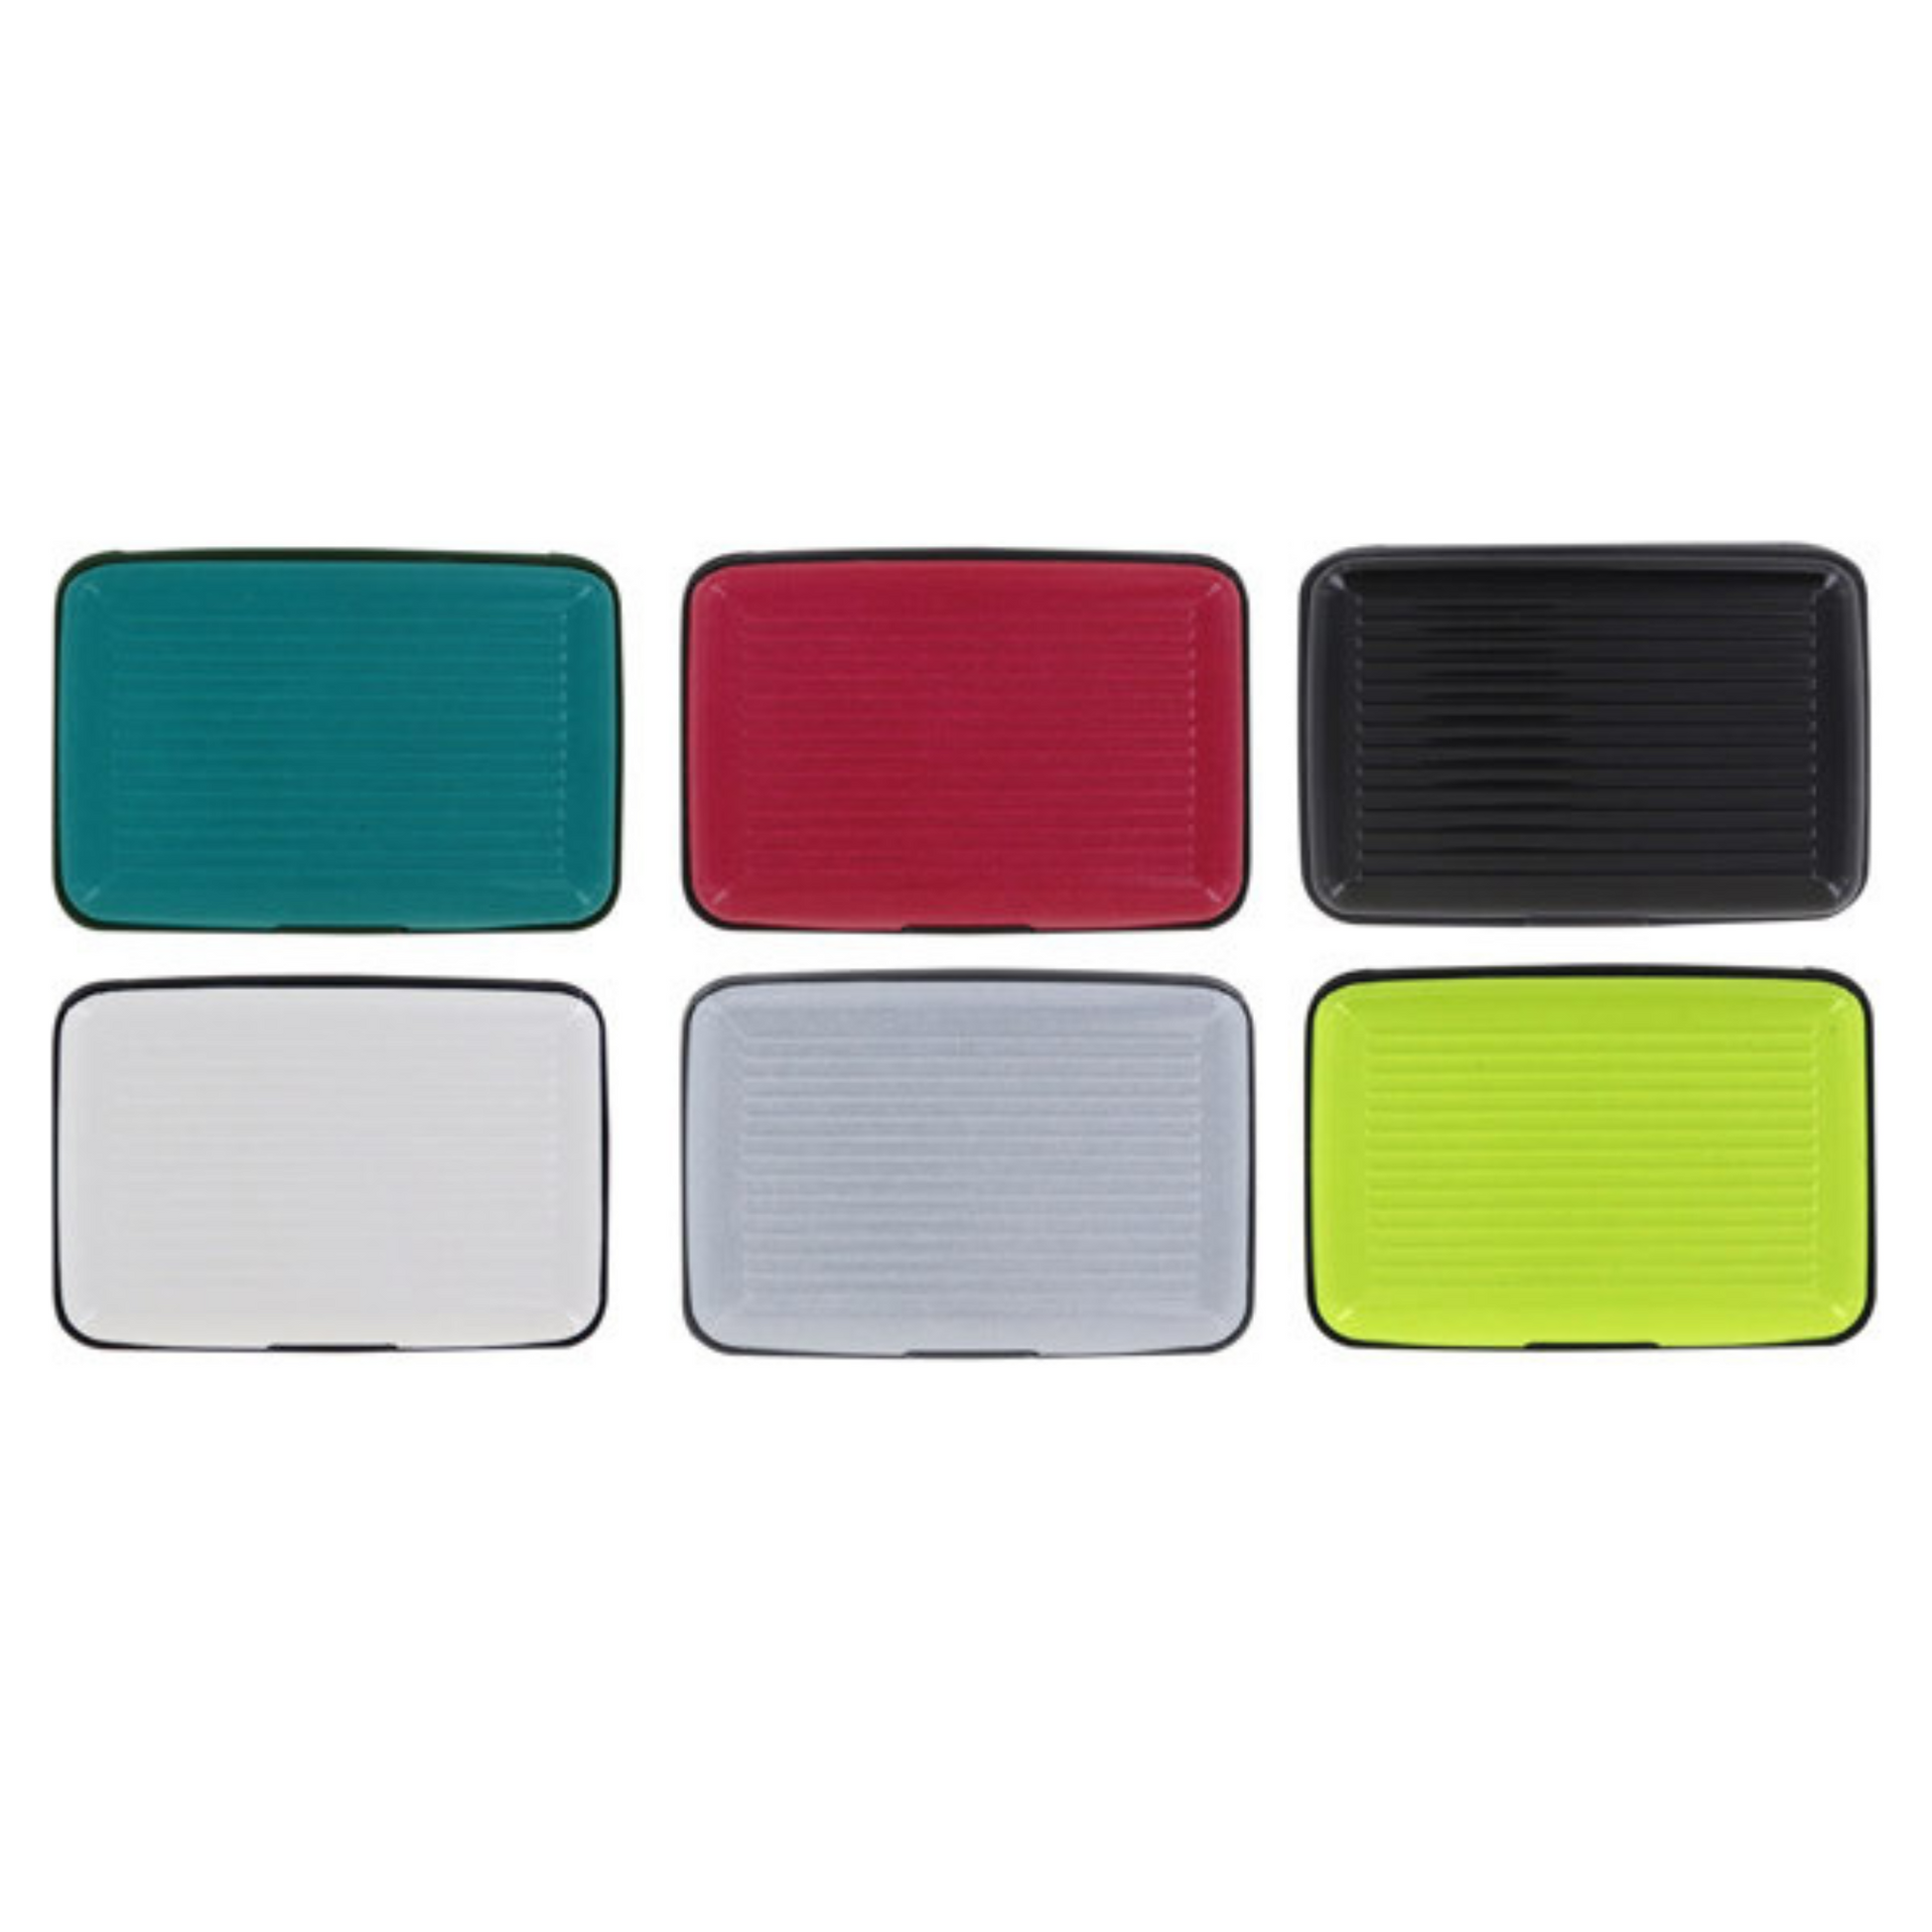 scan safe security wallet. Available in Teal, Burgundy, Black, Stone, Grey, and Lime